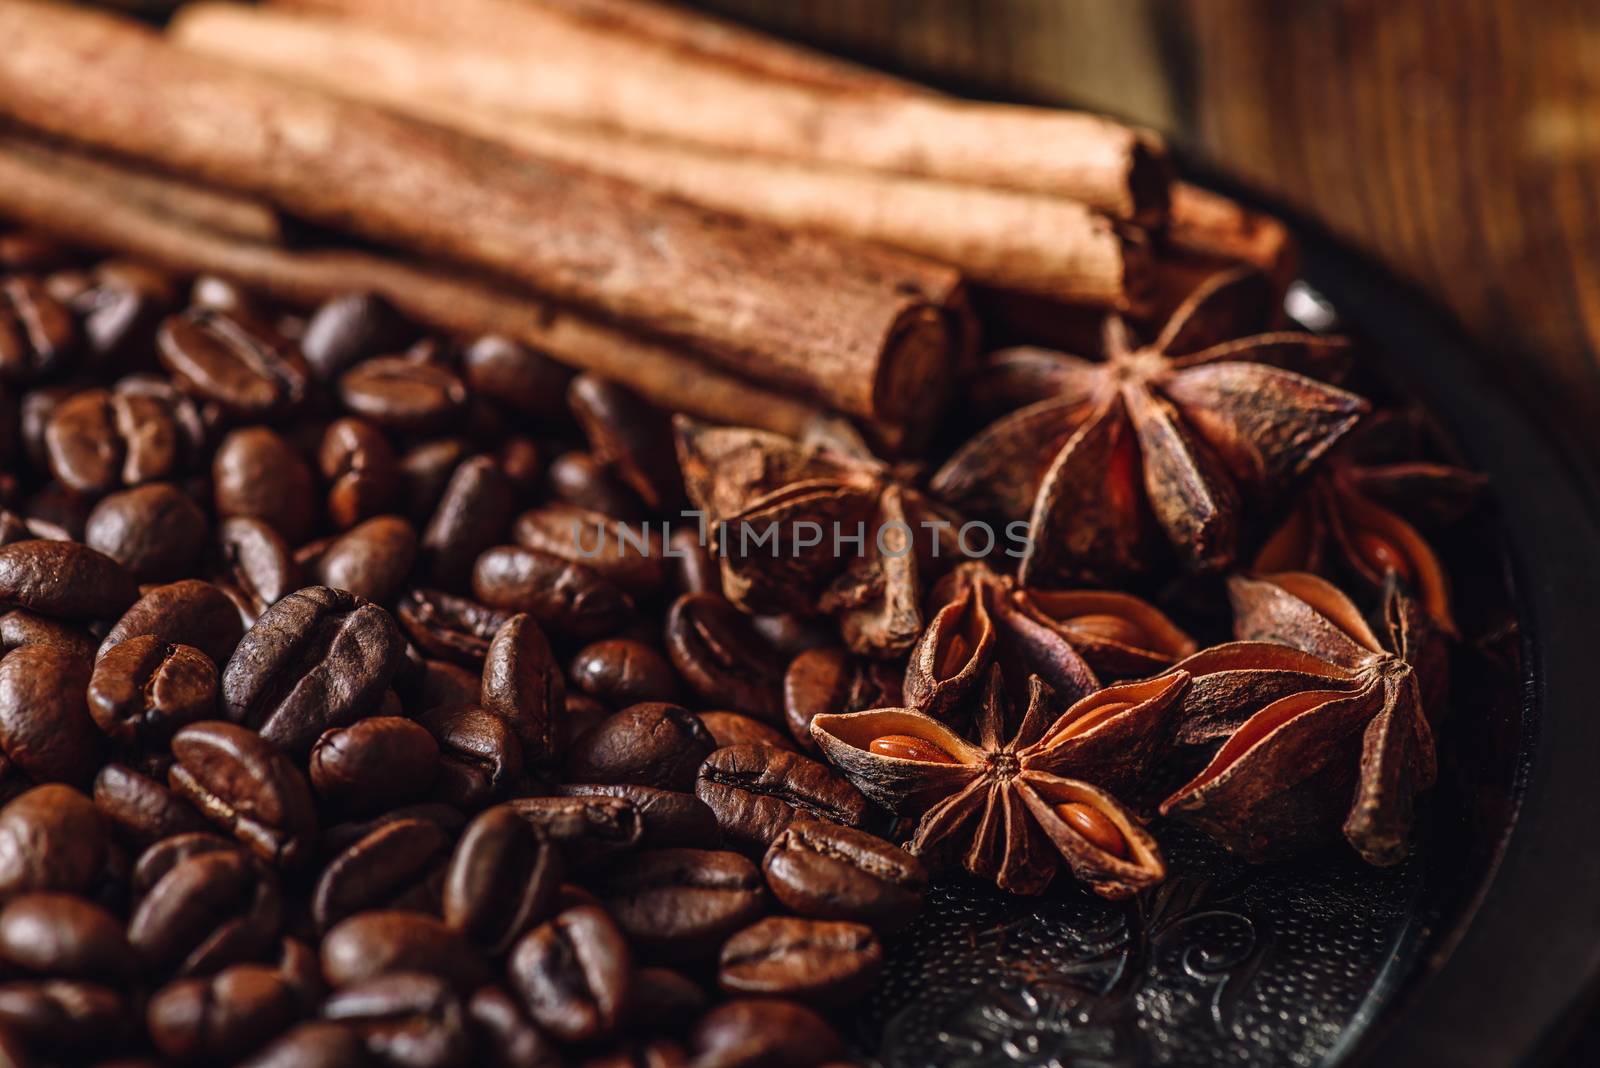 Coffee Beans with Cinnamon Sticks and Chinese Star Anise on Metal Plate.